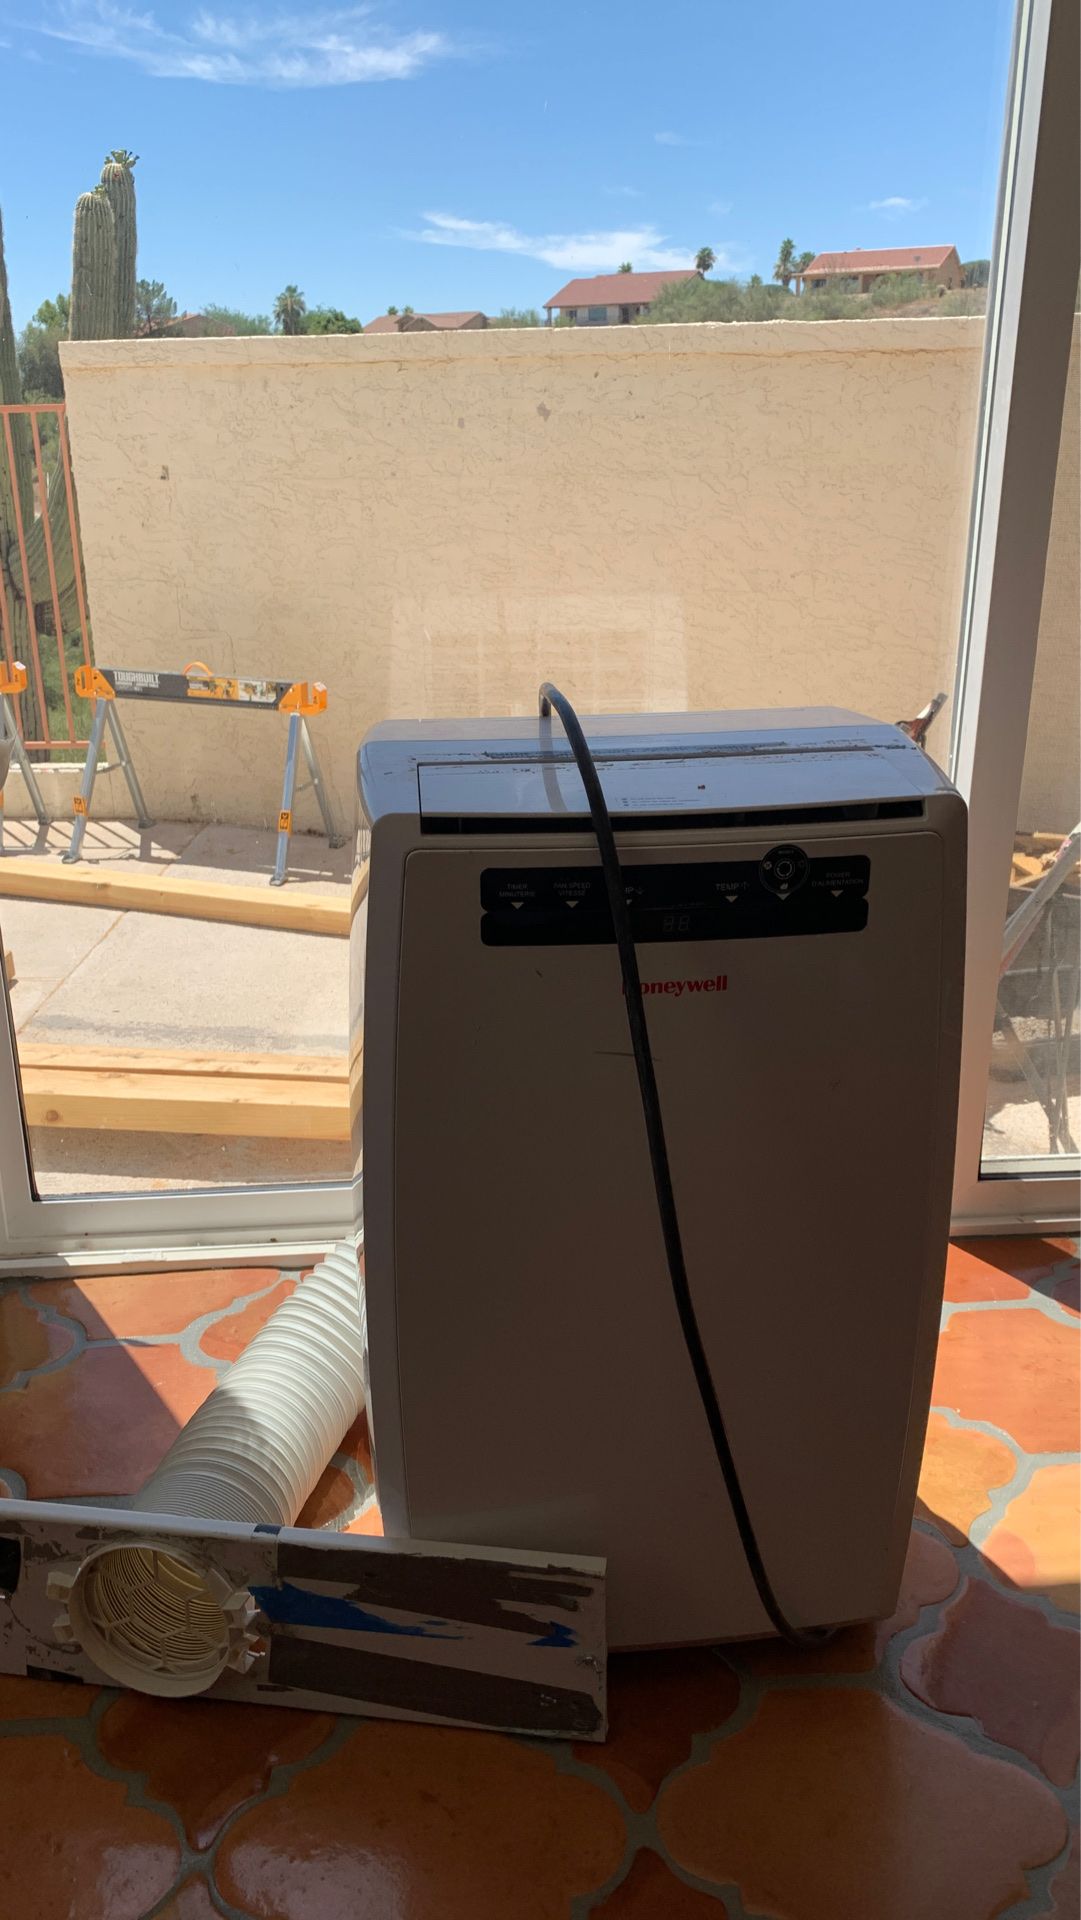 Honeywell AC works great. ICE COLD